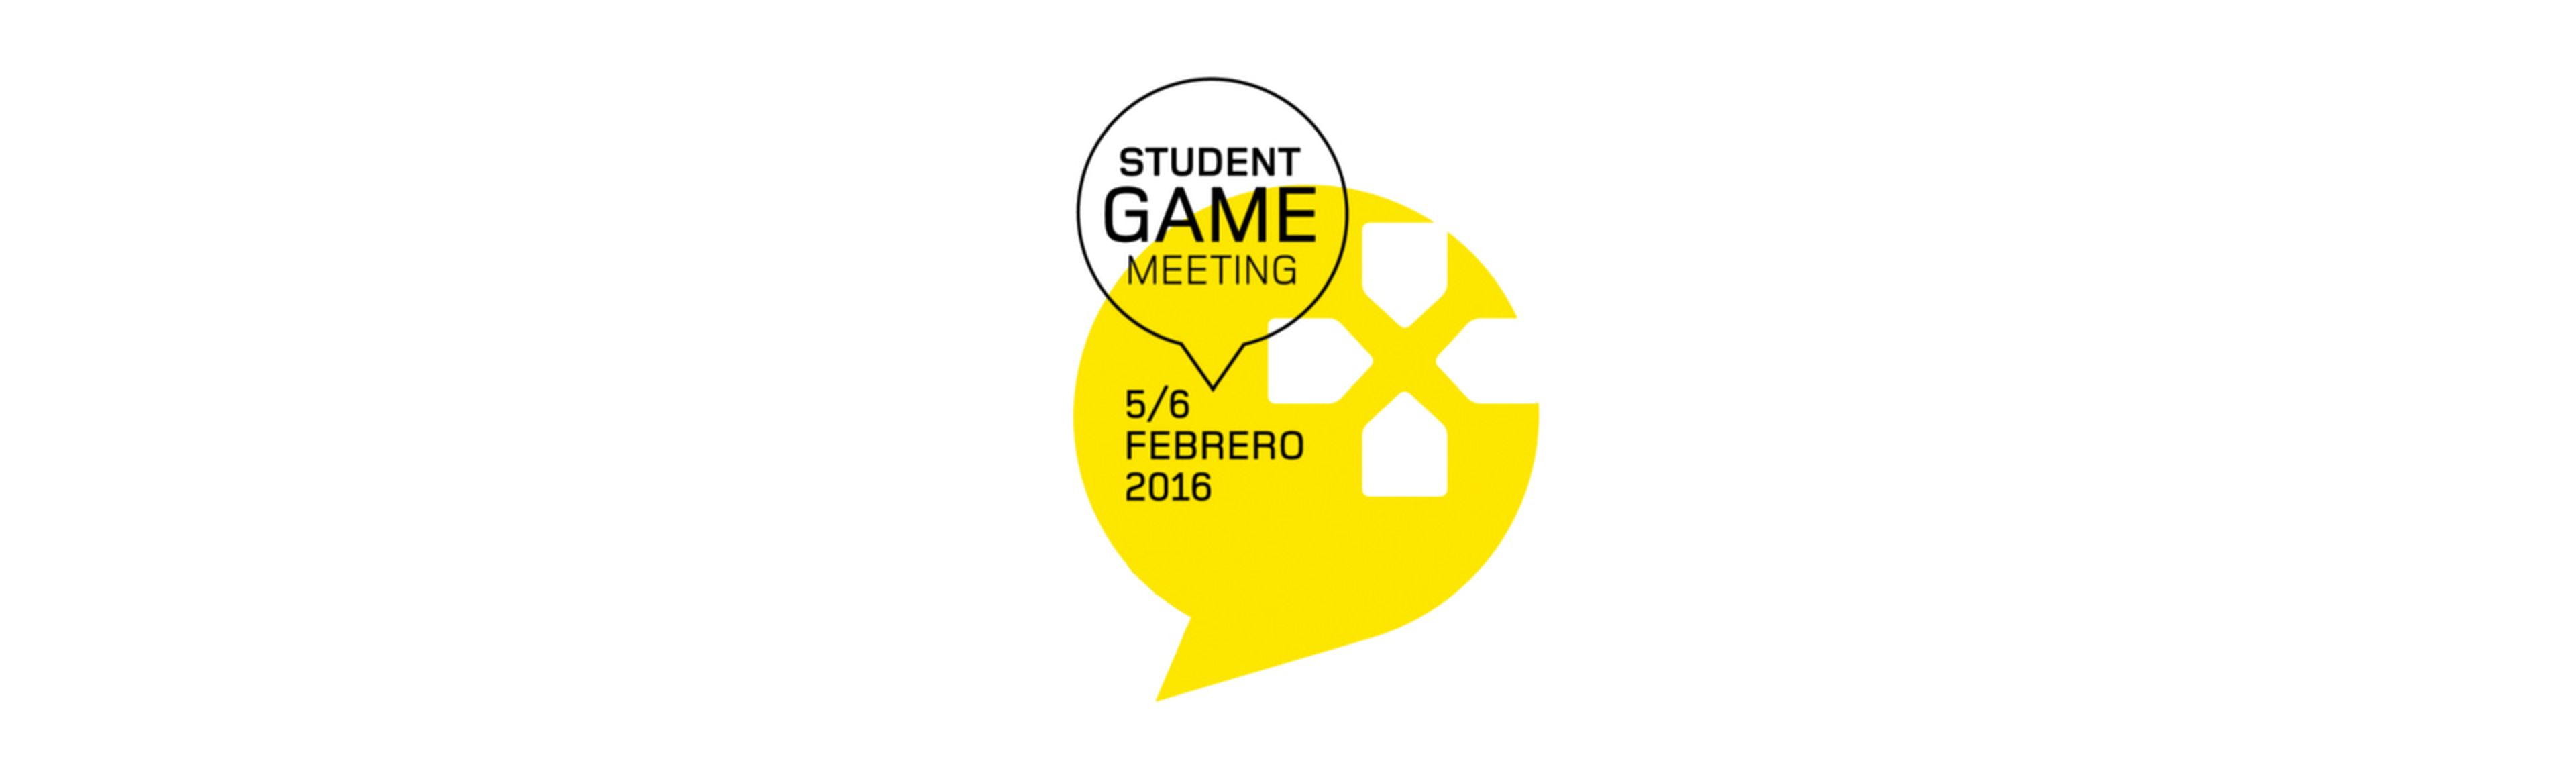 Student Game Meeting